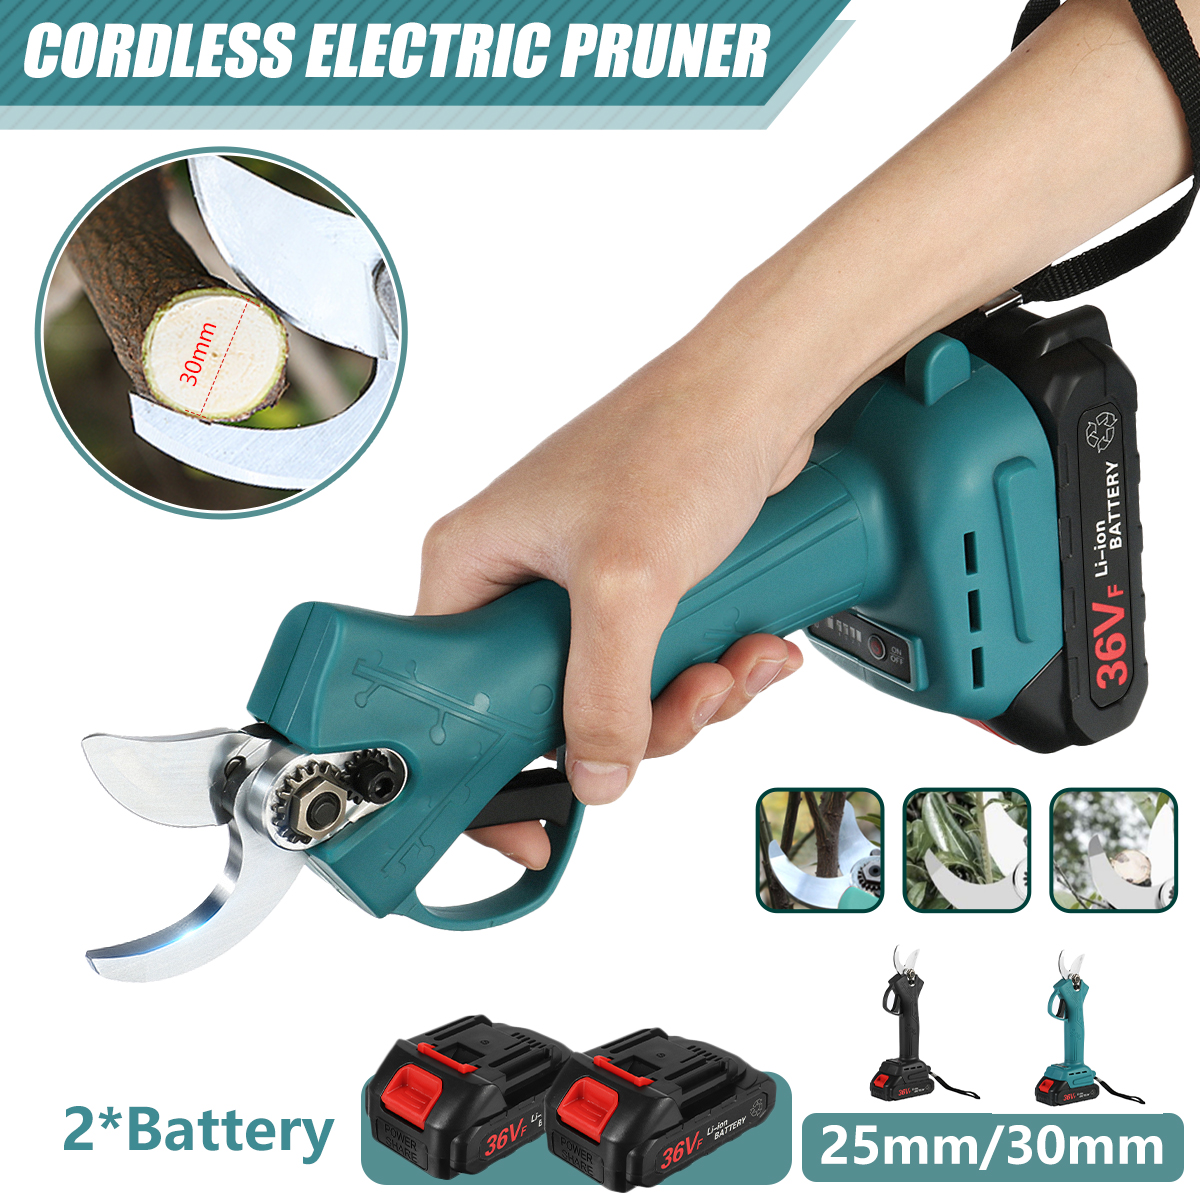 2530mm-Cordless-Electric-Branch-Scissors-Pruning-Shears-Cutter-Tool-Trimmer-W-2pcs-Battery-1814642-1